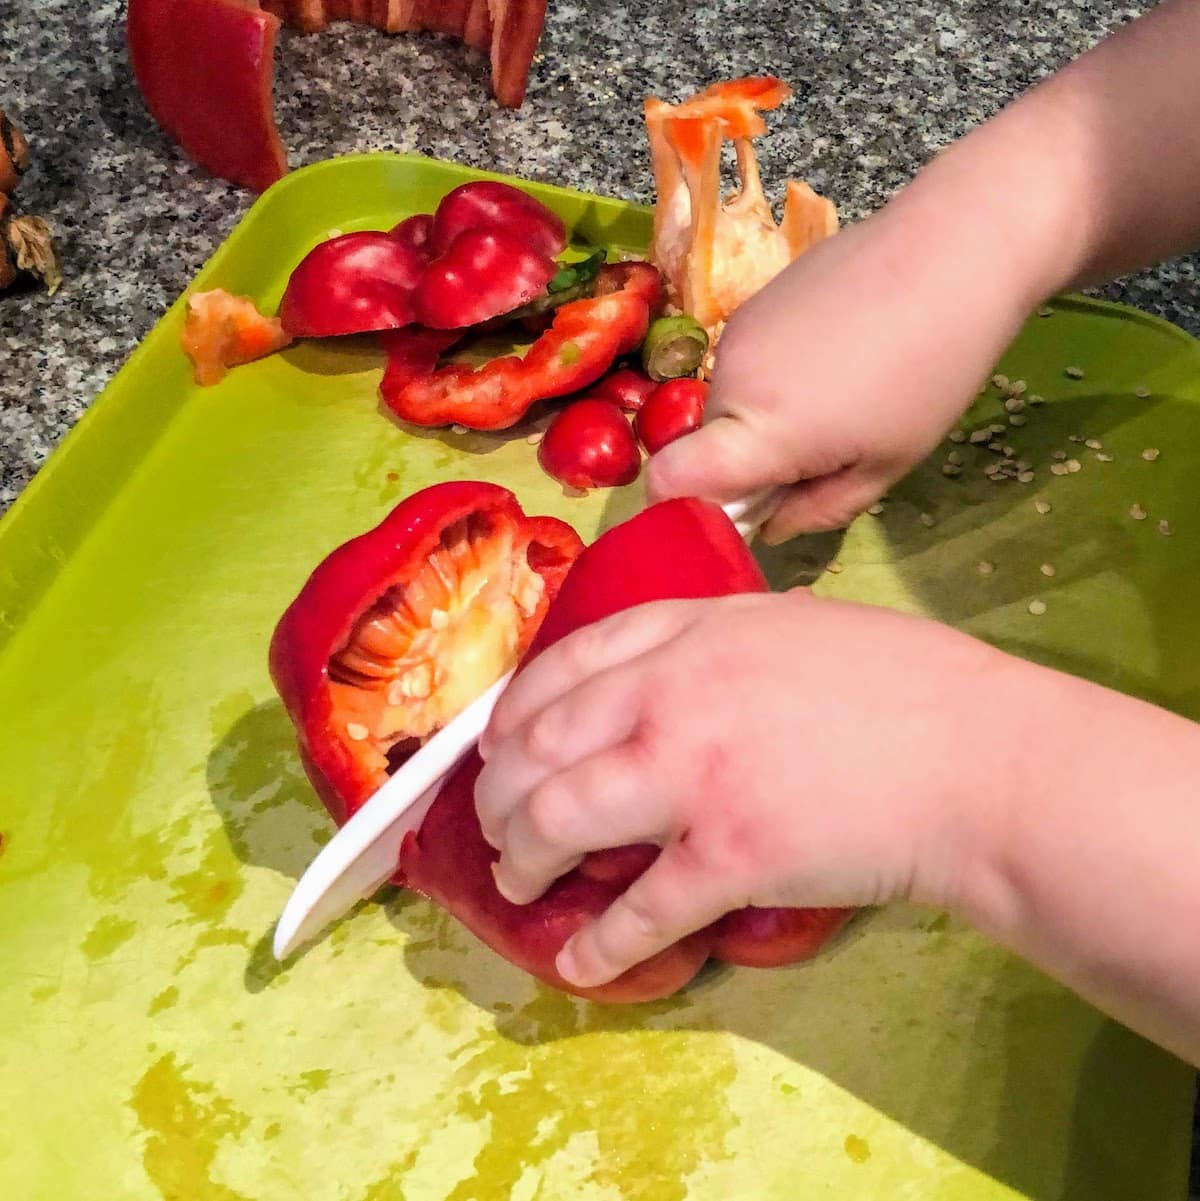 child cutting red bell pepper on green cutting board